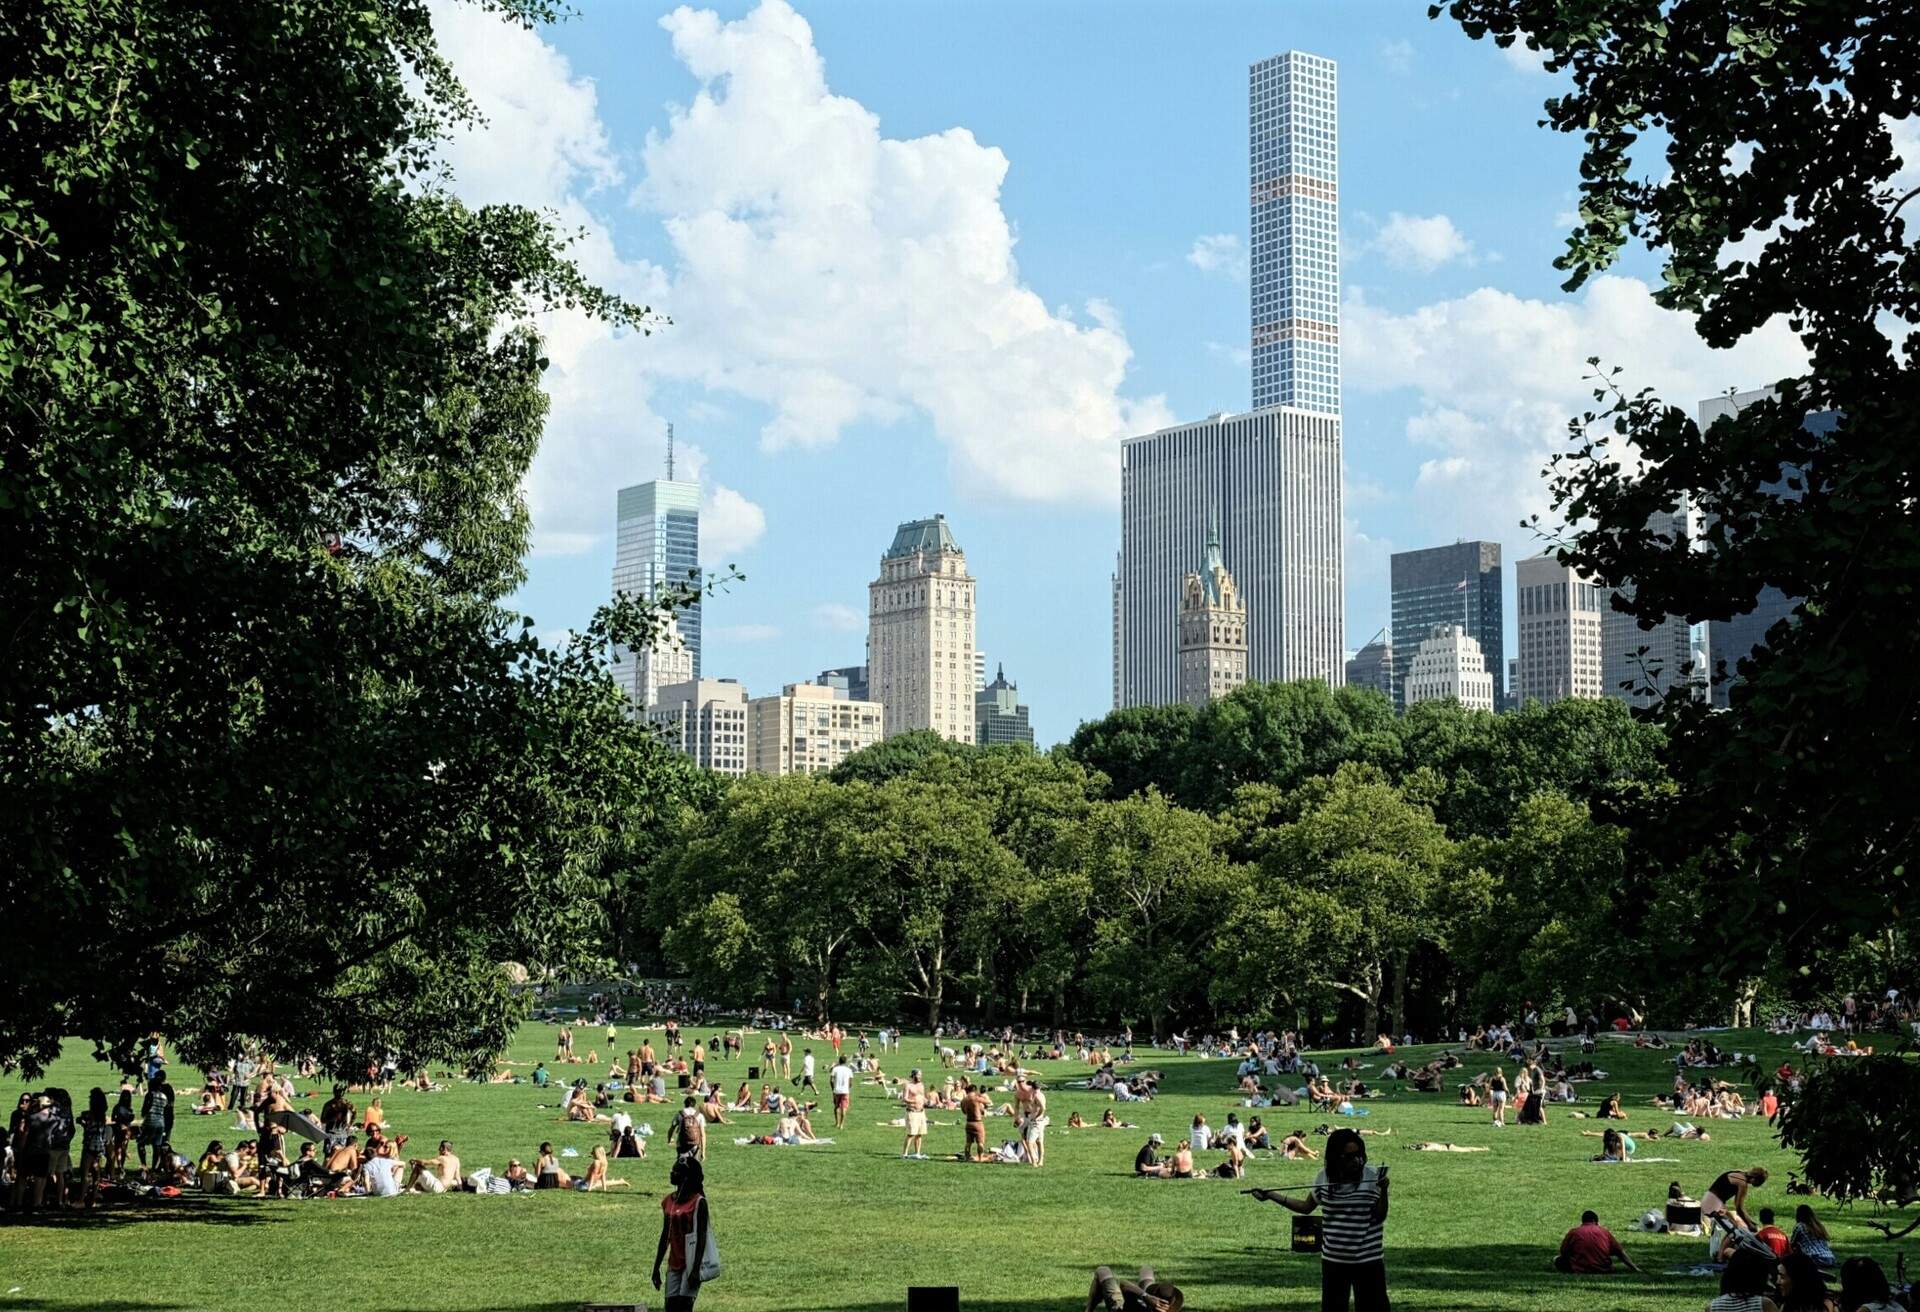 DEST_USA_NEW_YORK_NYC_CENTRAL_PARK_GettyImages-583922199